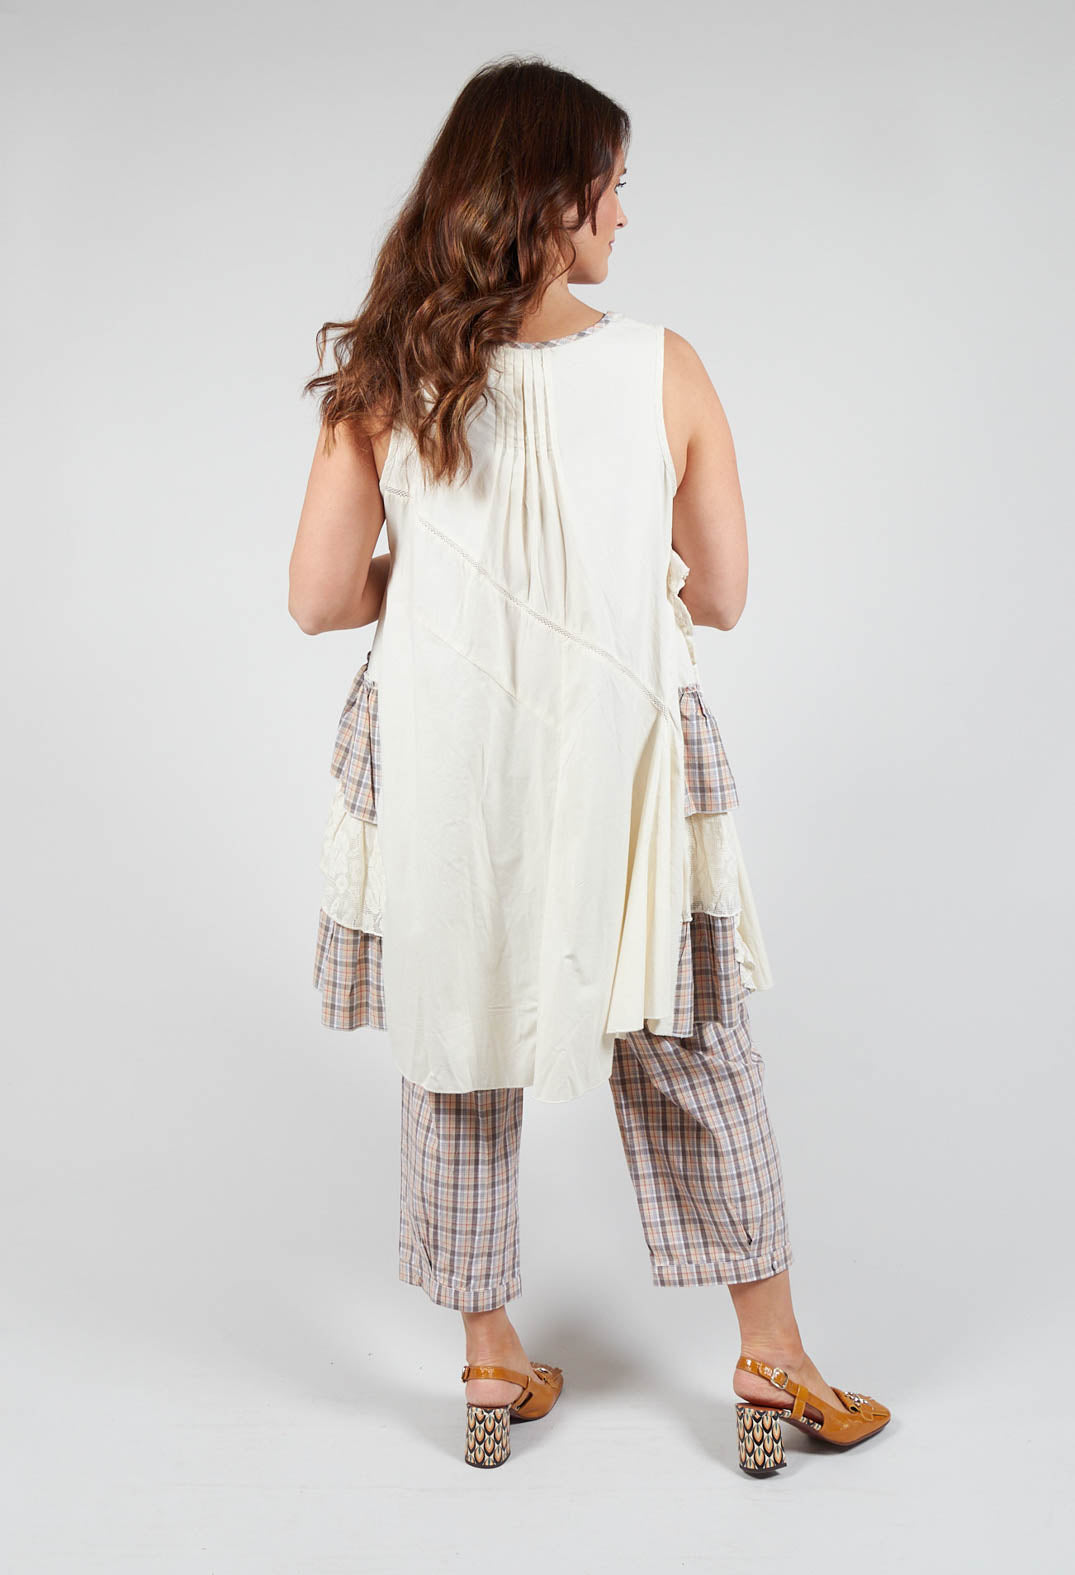 Sleeveless A Line Top with Francoise Tartan Detail in Cream